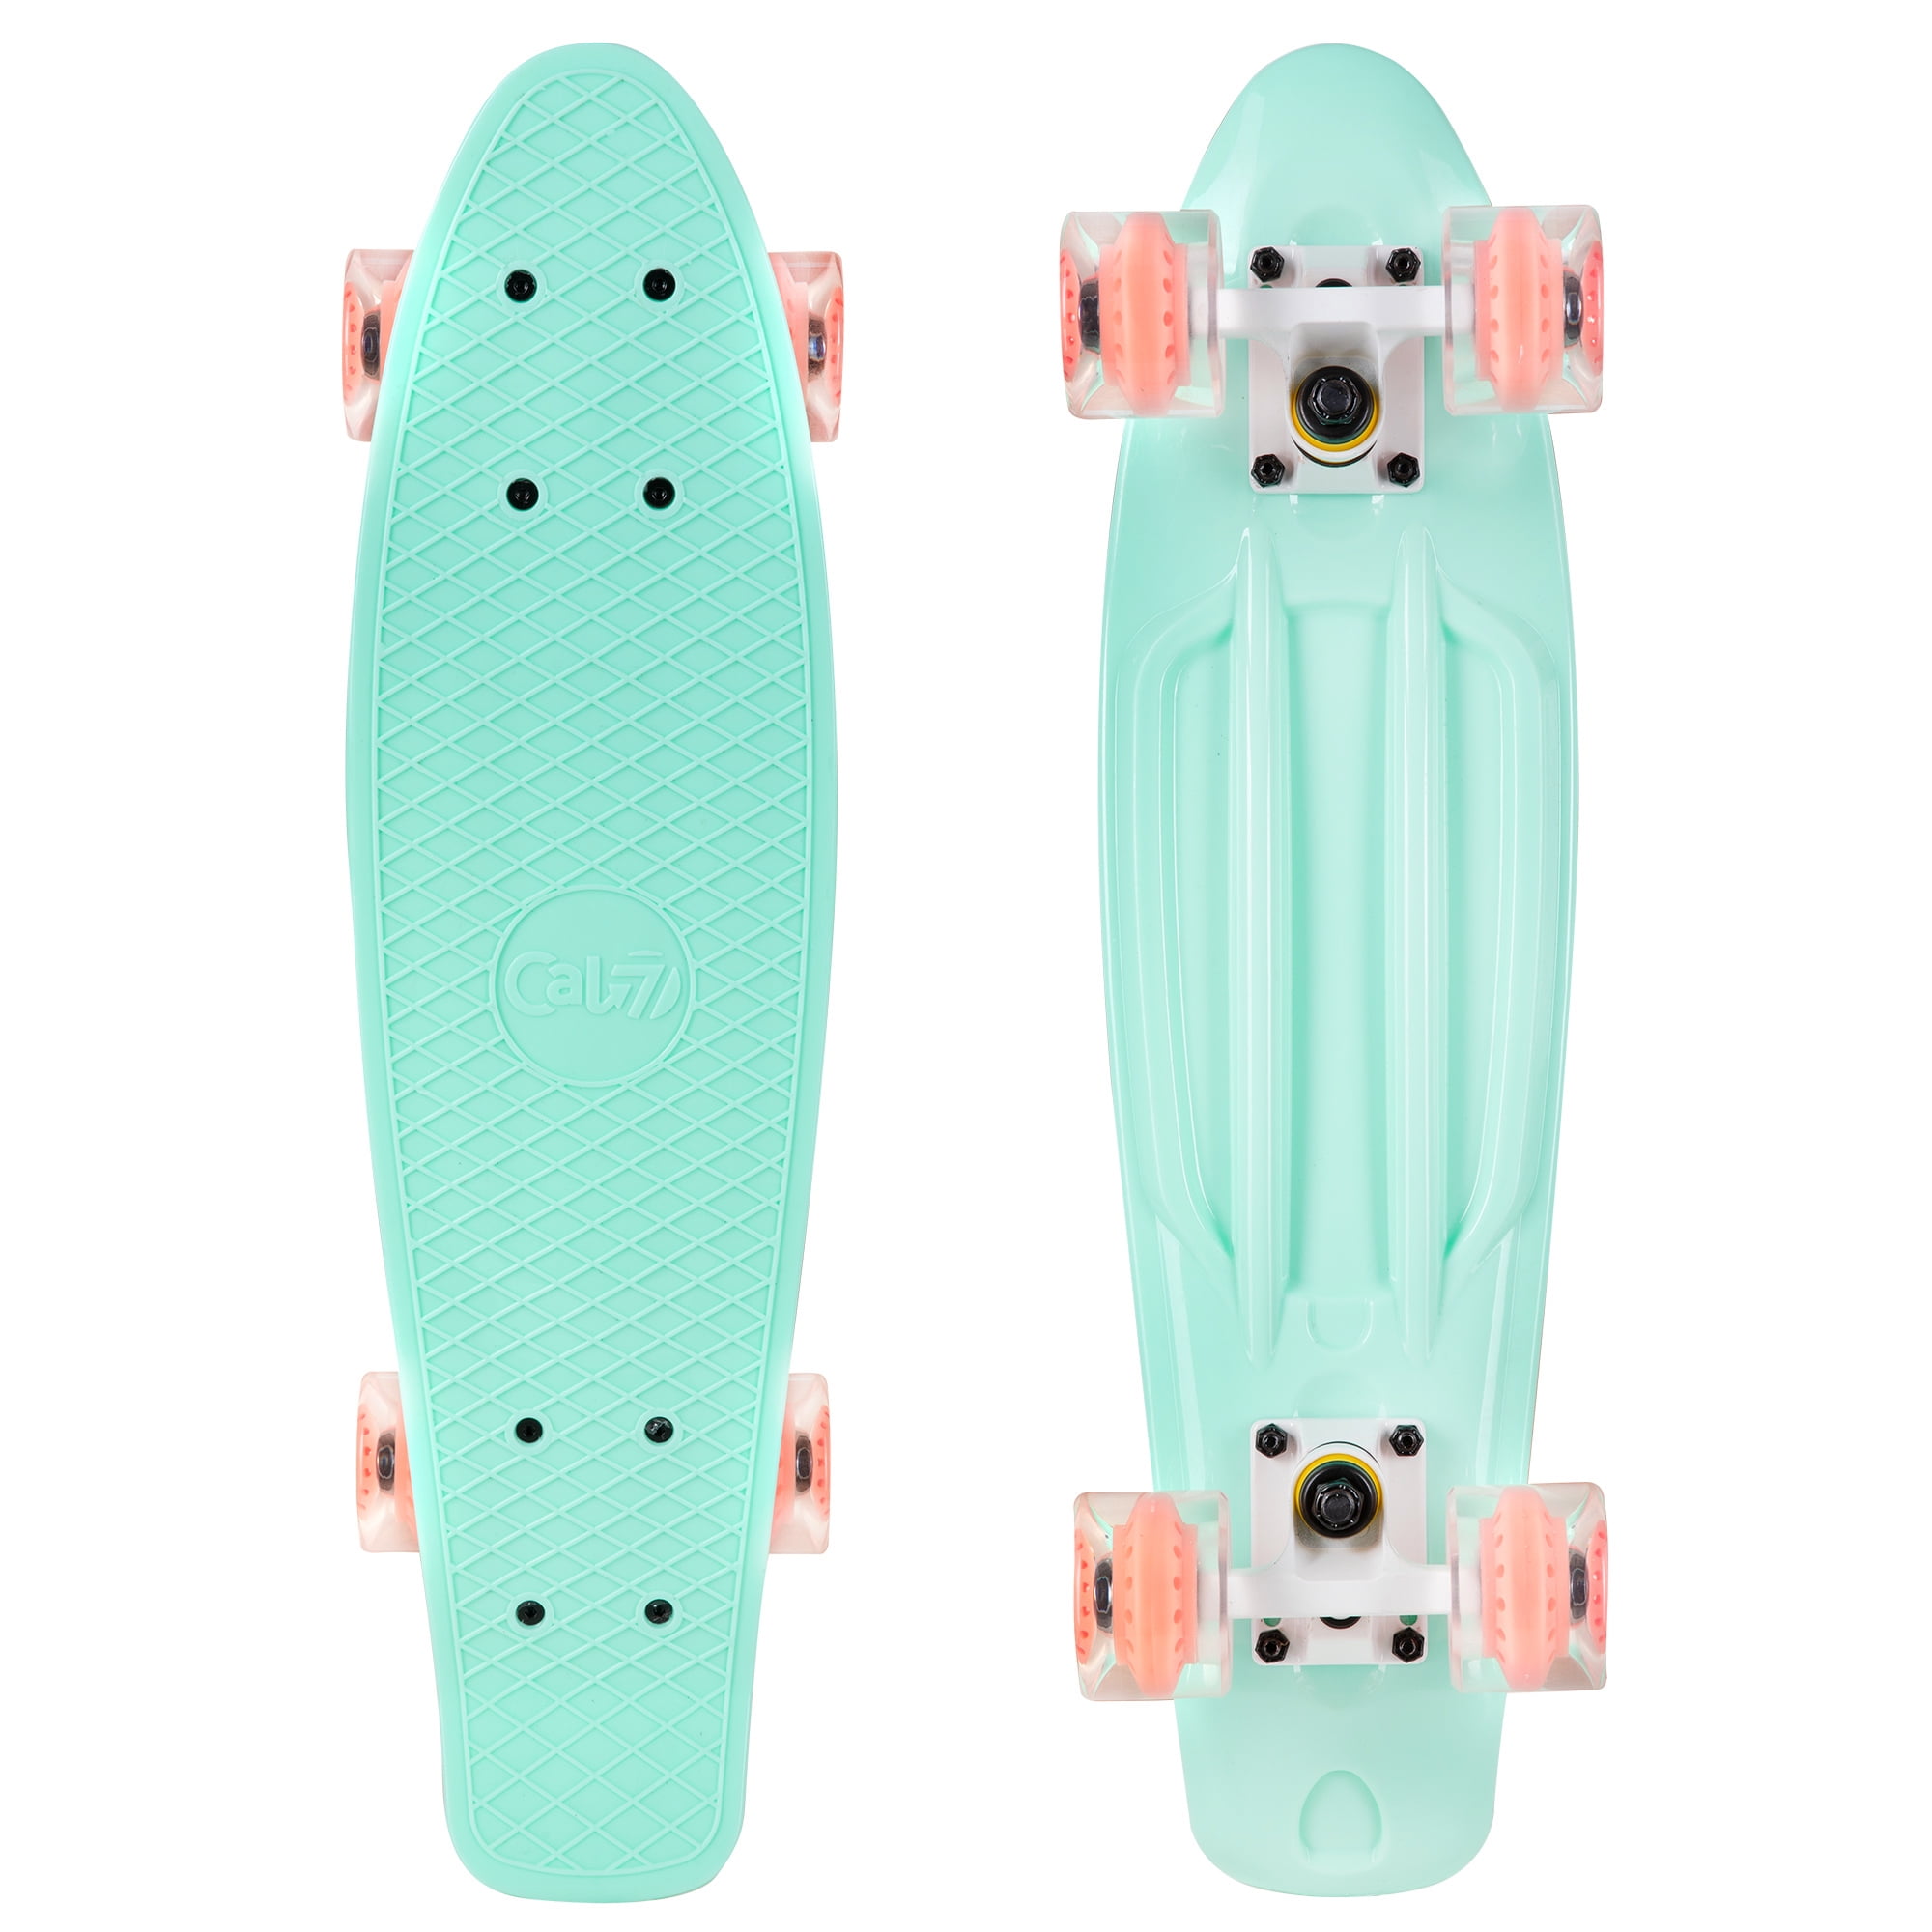 Cal 7 Complete Mini Cruiser | 22 Inch Micro Board | Vintage Skateboard For School And Travel (Arcadia)